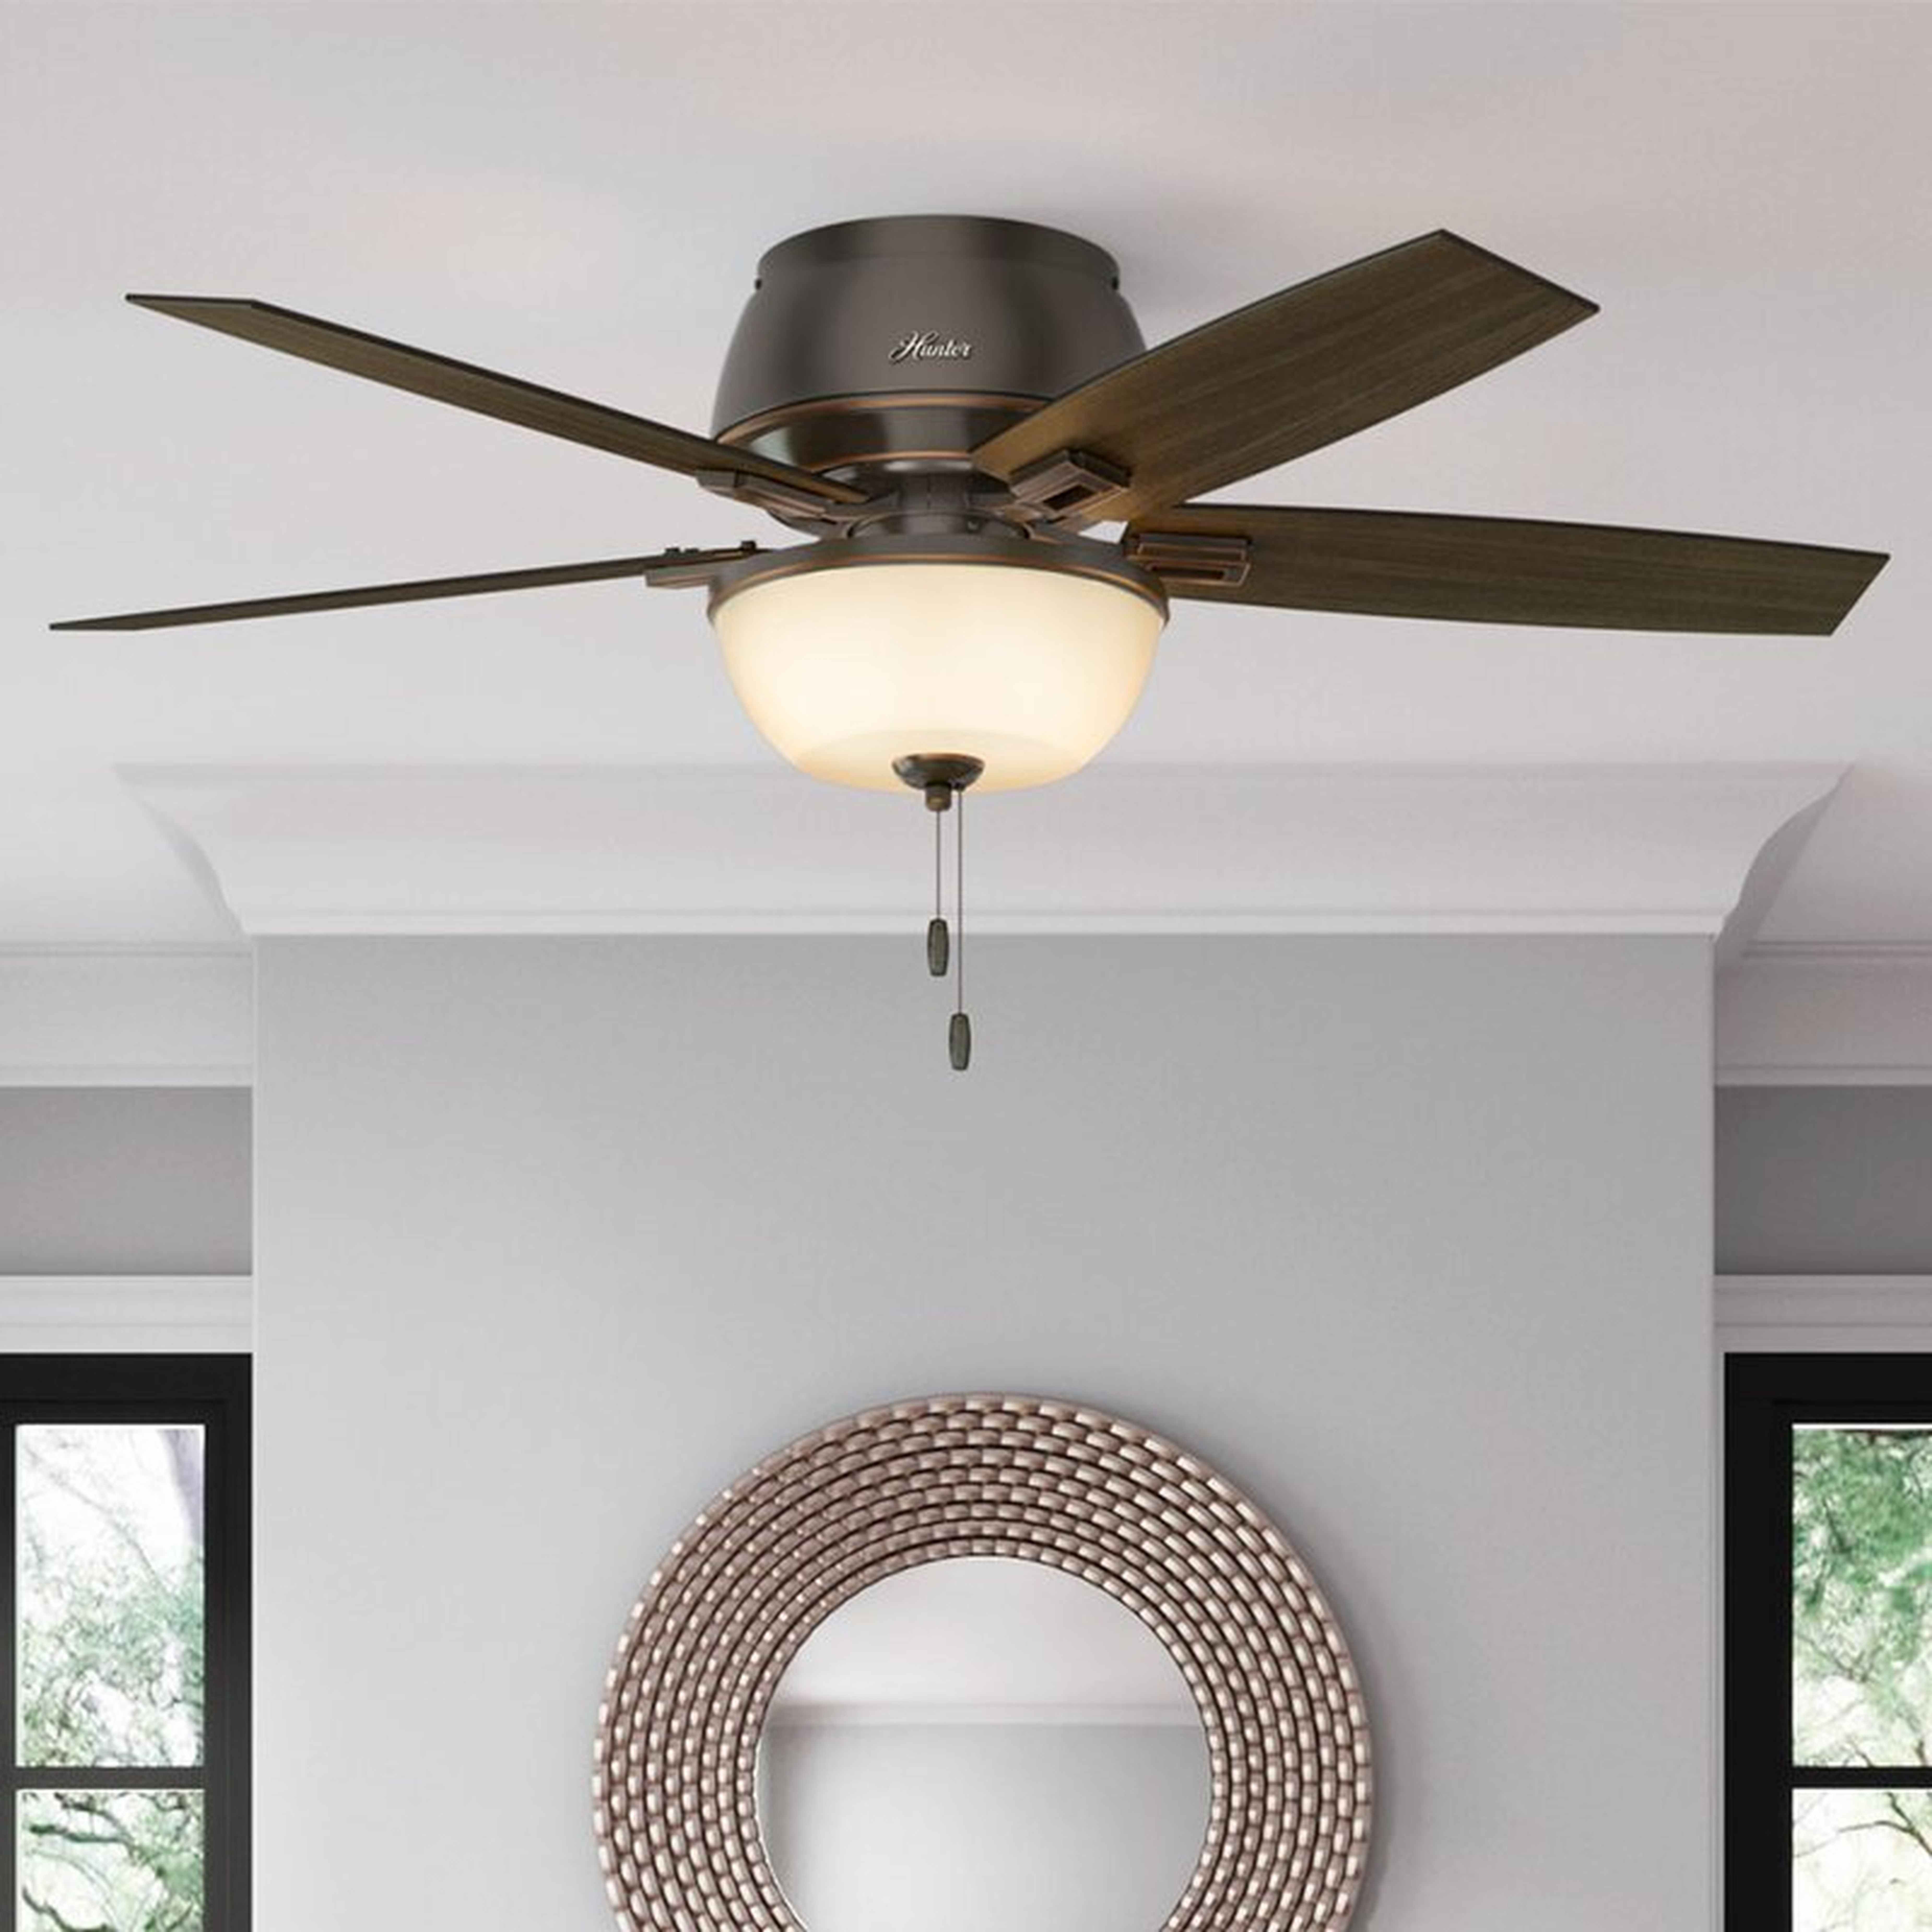 52" Donegan 5 - Blade Flush Mount Ceiling Fan with Pull Chain and Light Kit Included - Birch Lane